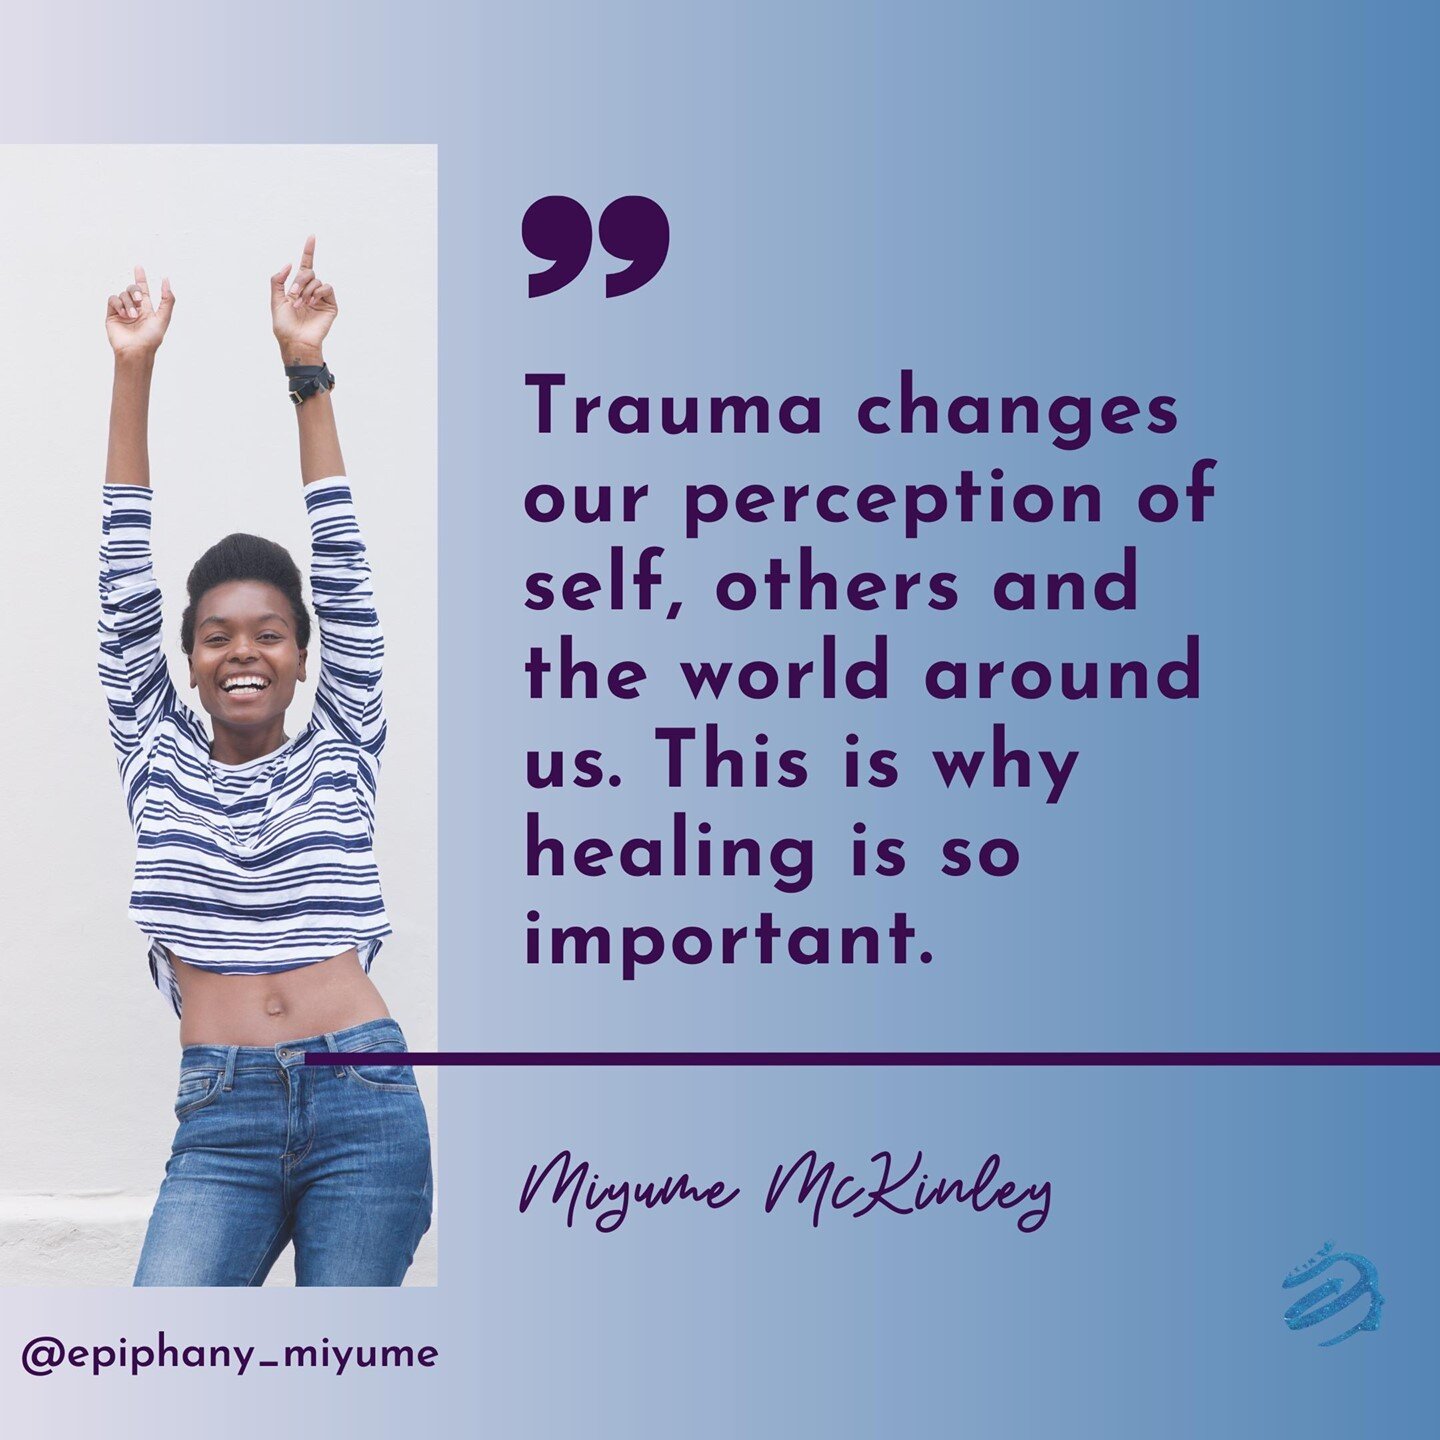 &quot;Trauma changes our perception of self, others and the world around us. This is why healing is so important.&quot;⁠
⁠
Don't let your trauma hold you back any longer!⁠
⁠
If you'd like to book me for a talk or workshop on the importance of tacklin